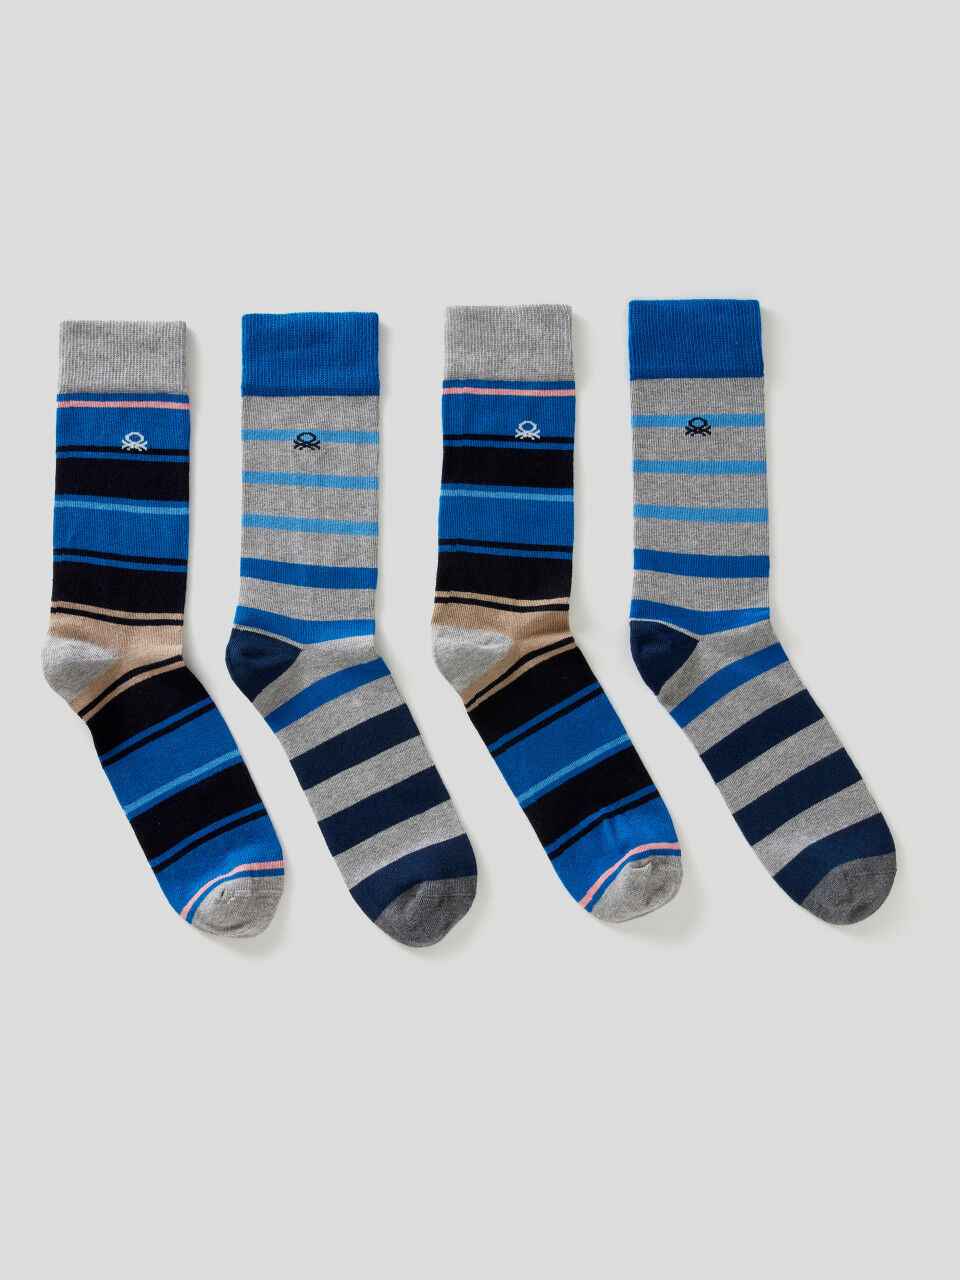 Two pairs of socks with jacquard pattern